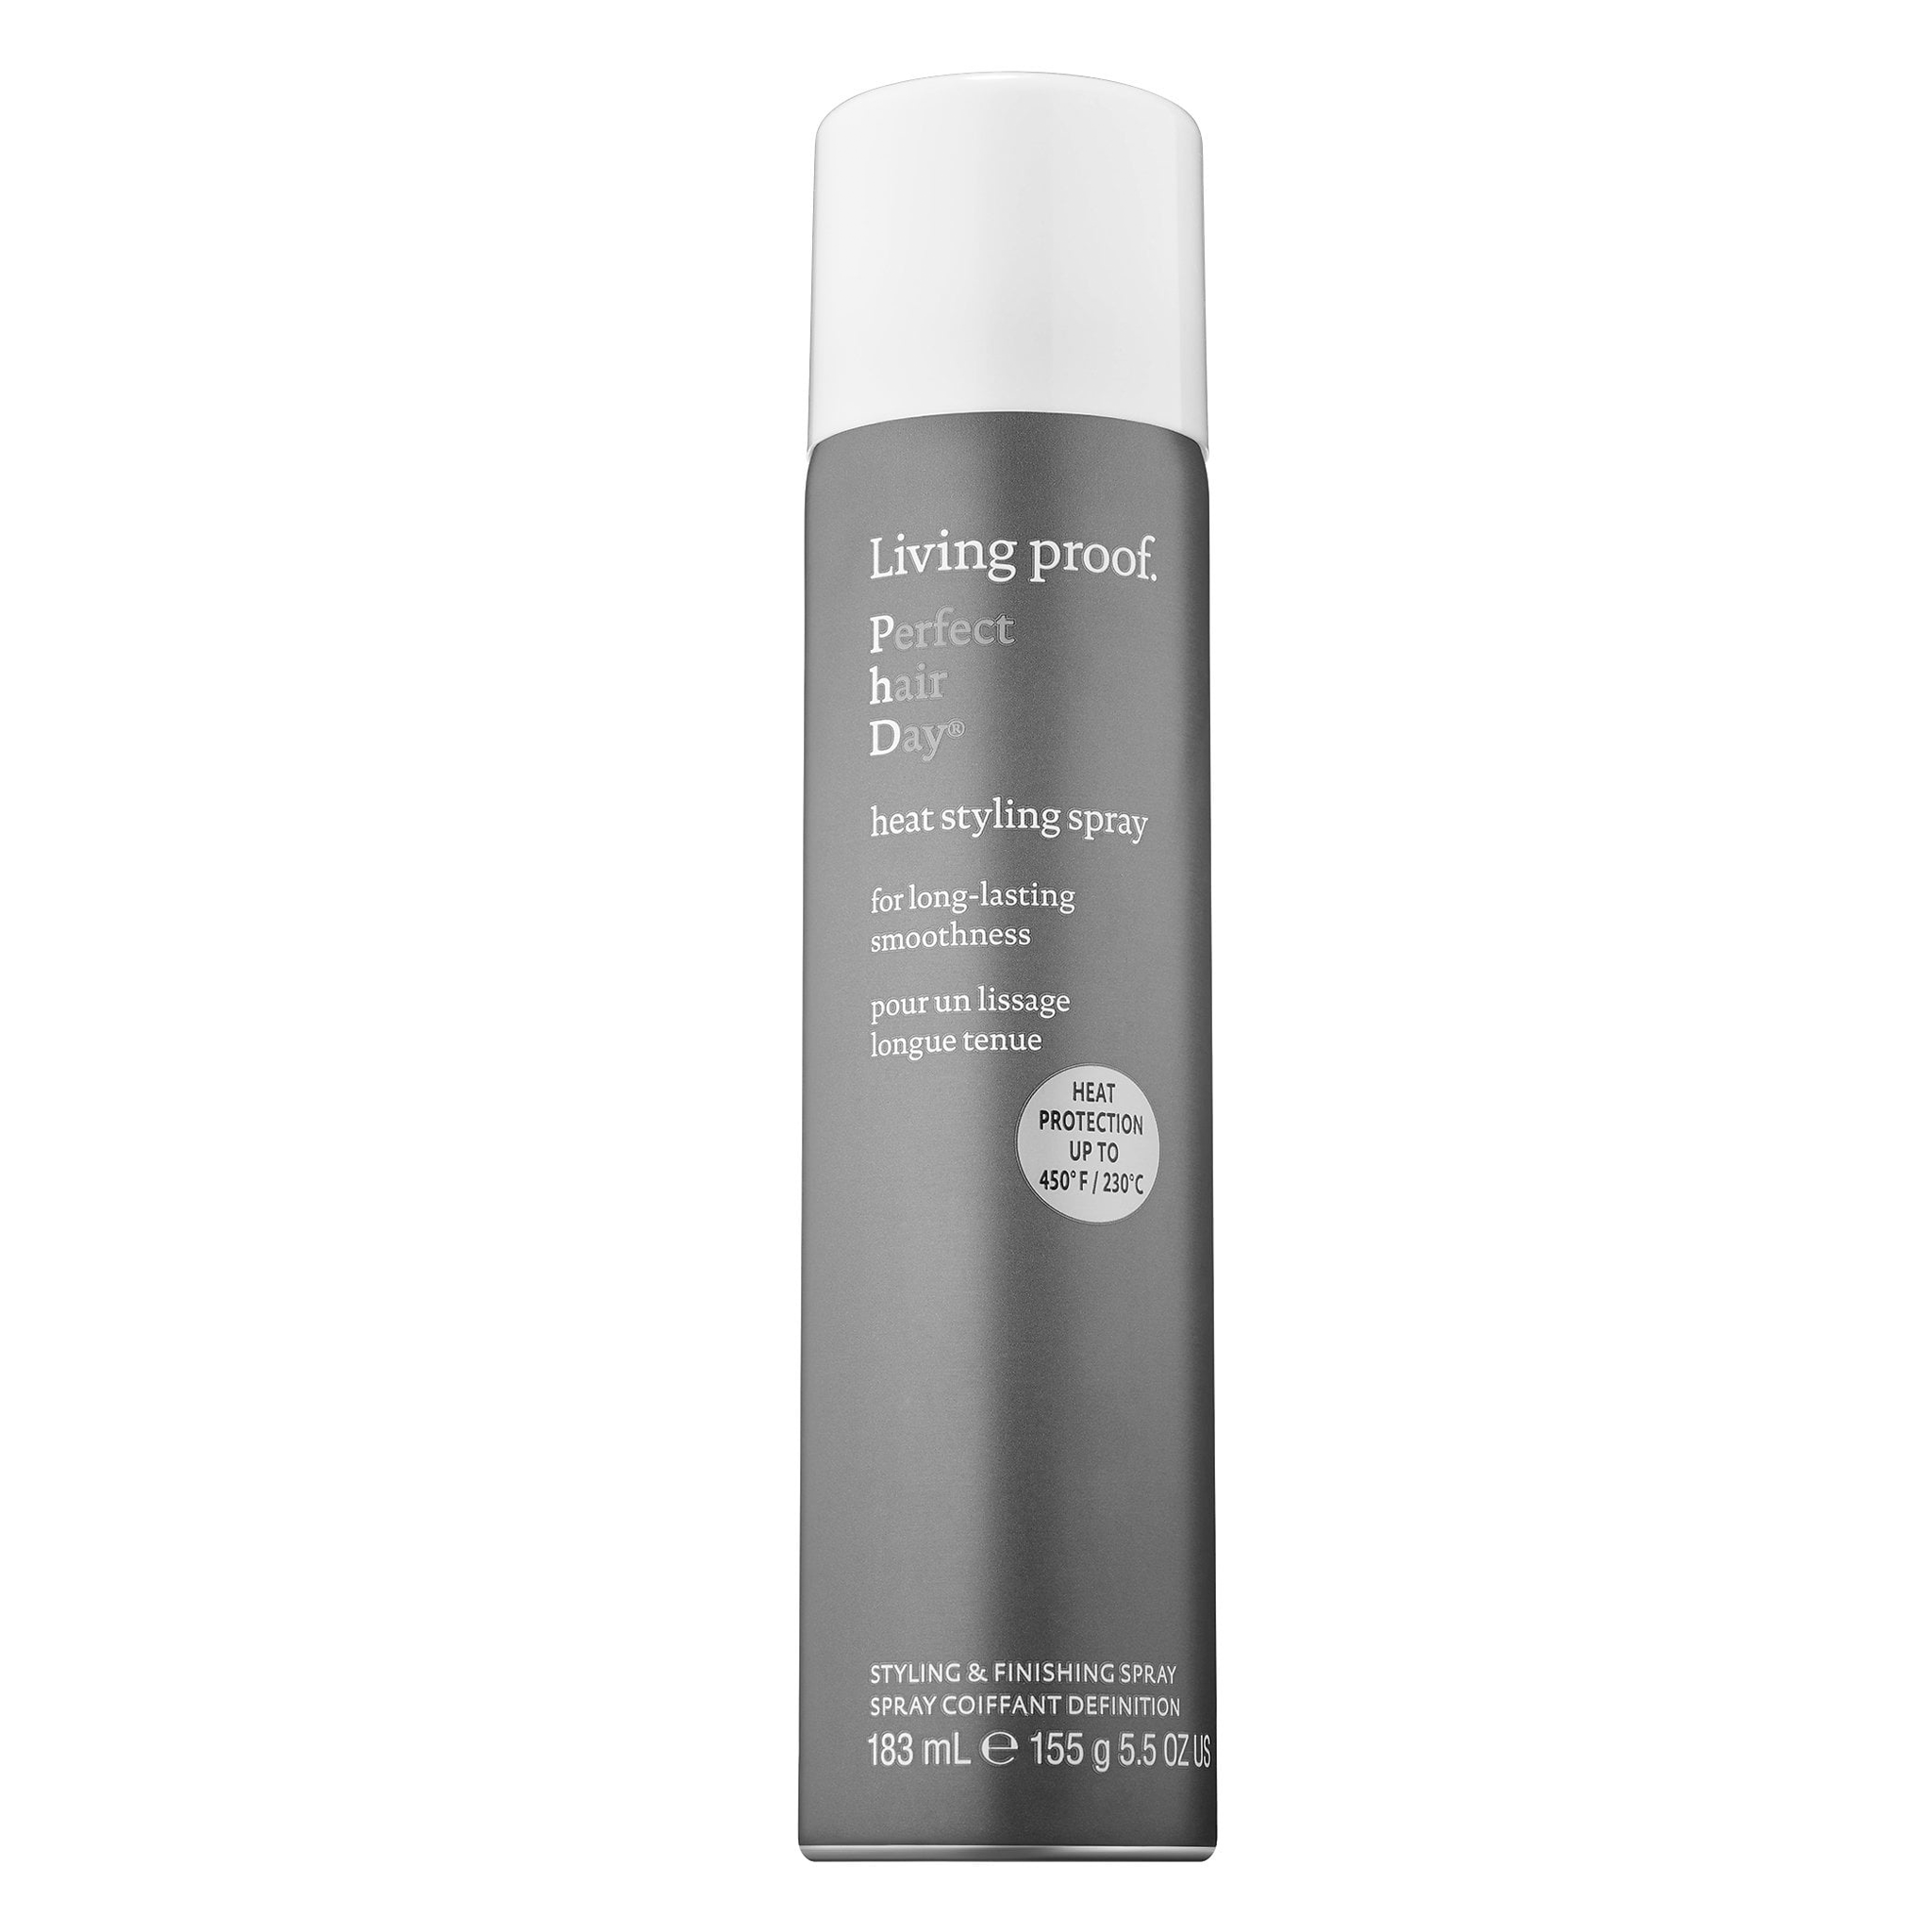 Living Proof. Spray Coiffant Thermique Perfect Hair Day - 183 ml